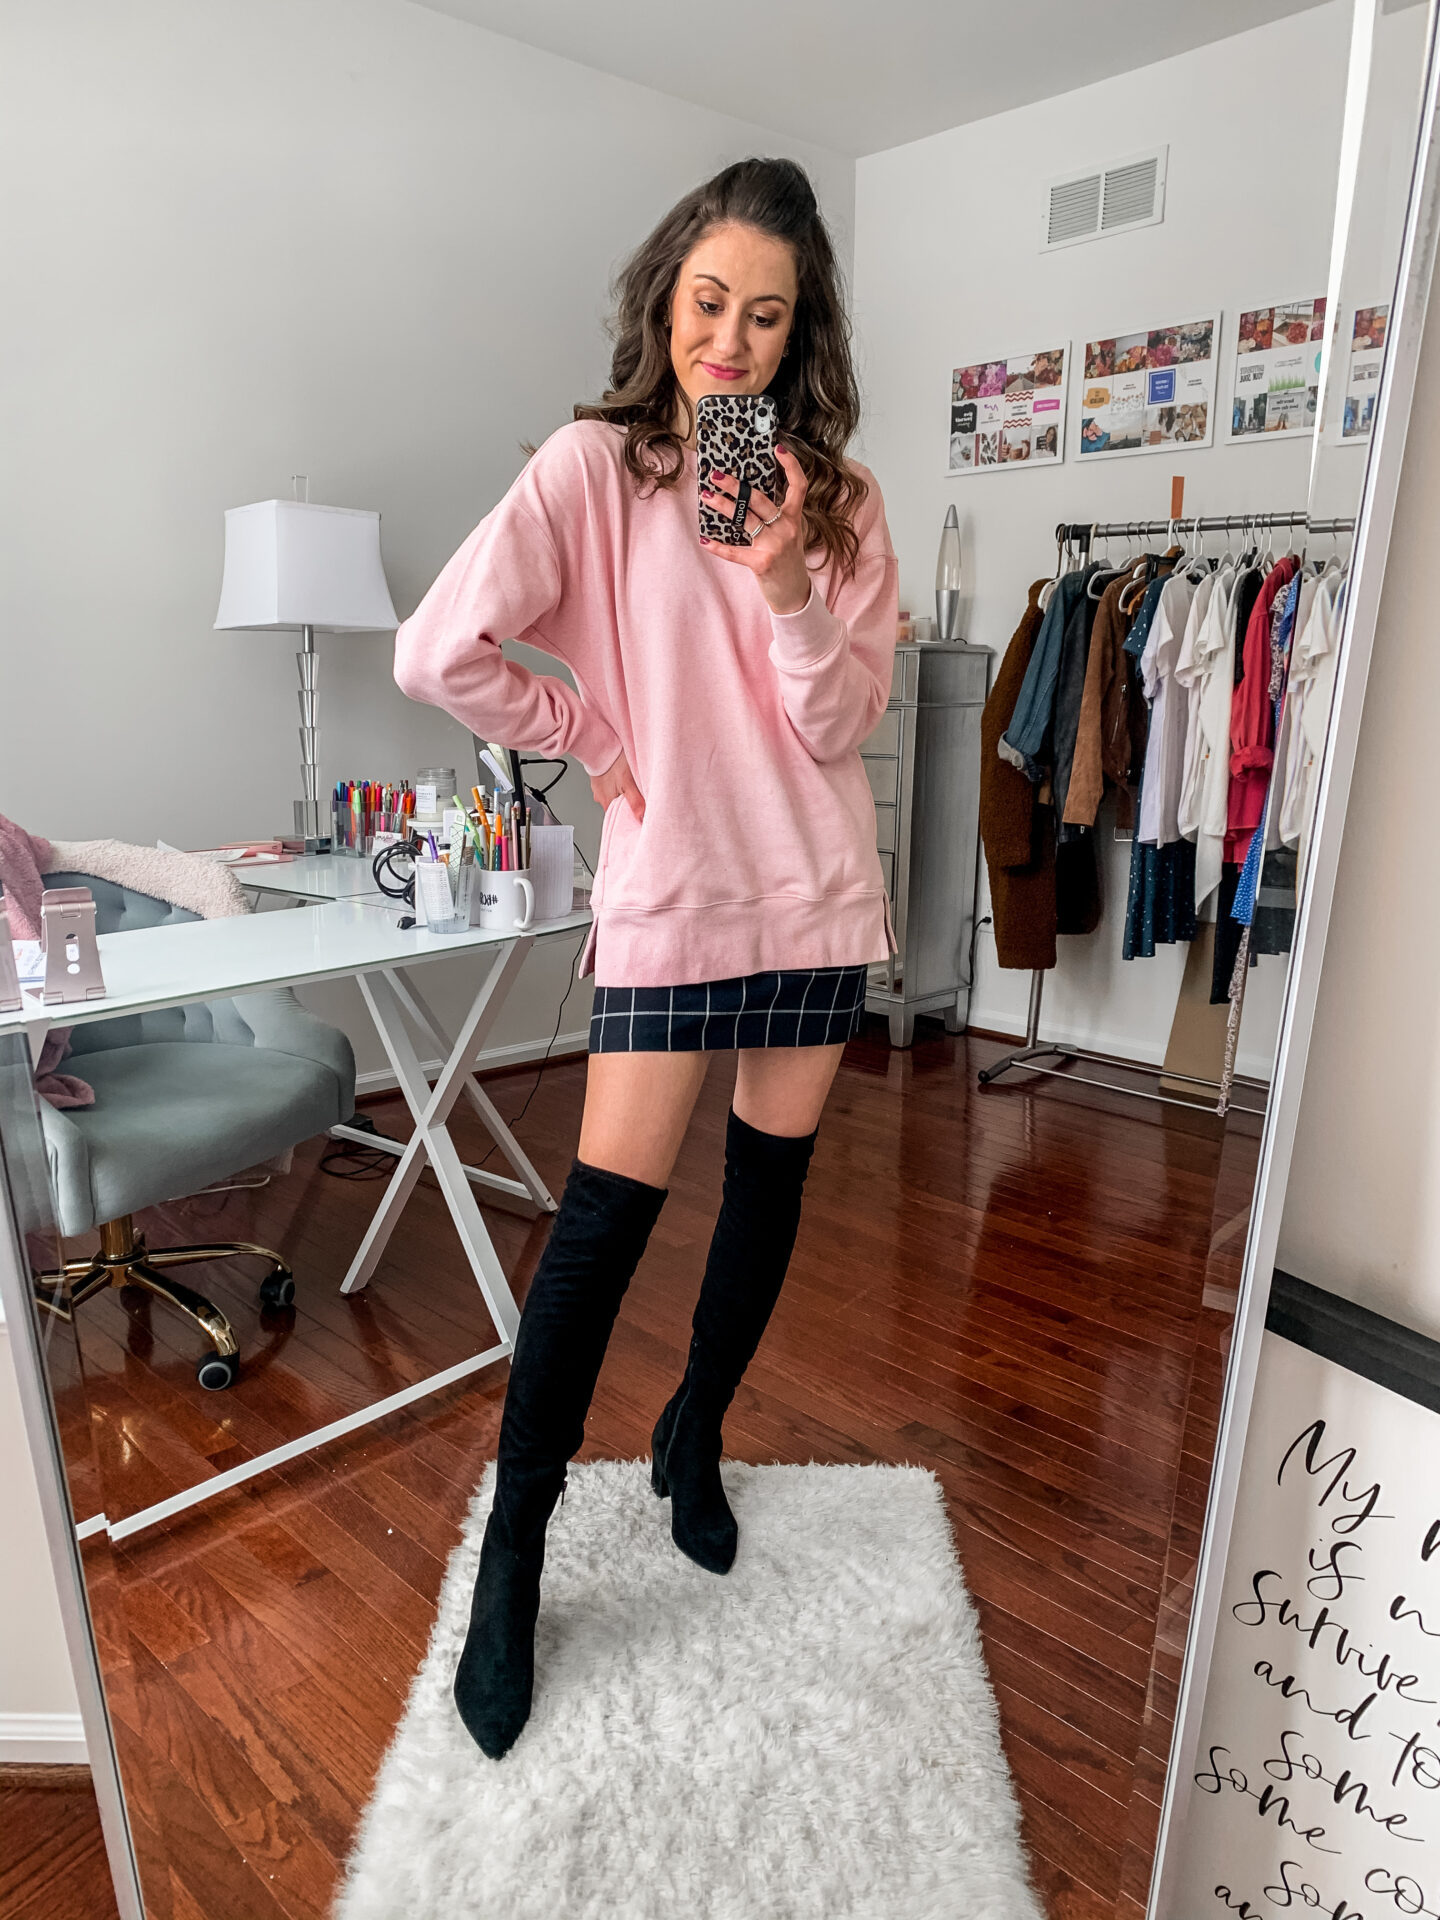 8 CUTE WAYS TO WEAR YOUR FAVORITE SWEATSHIRT - Sweatshirt Outfit Ideas on Coming Up Roses